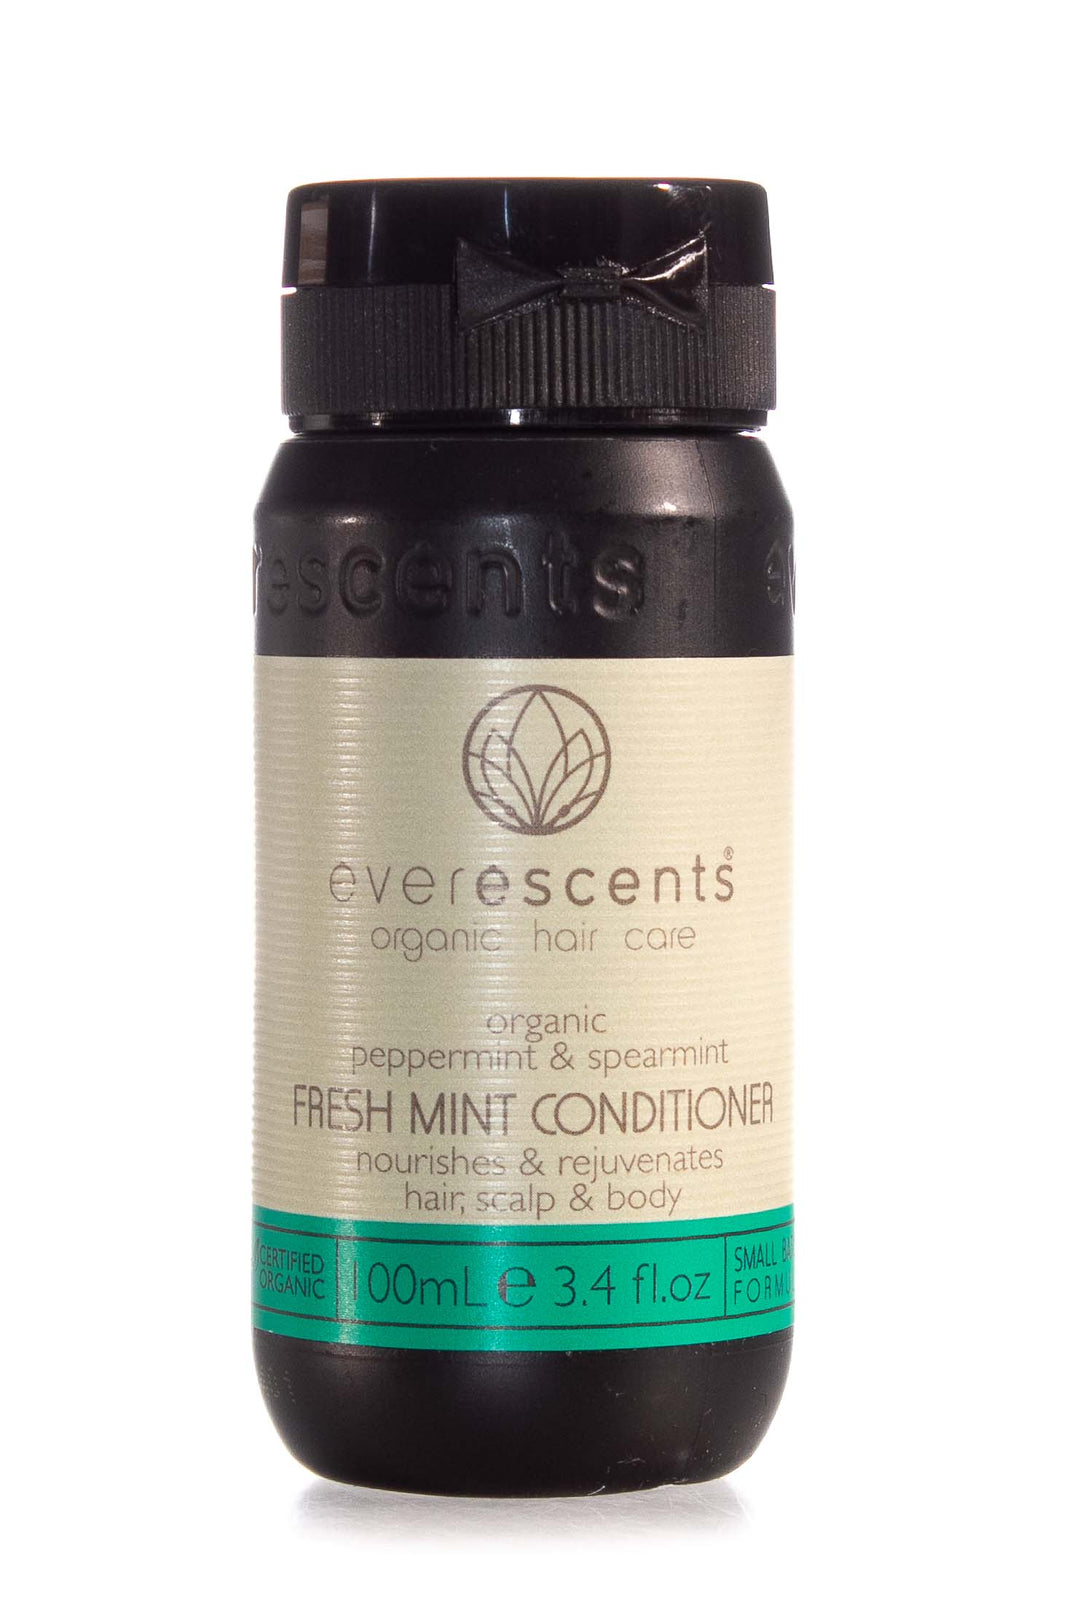 everescents-organic-peppermint-and-spearmint-fresh-mint-conditioner-100ml